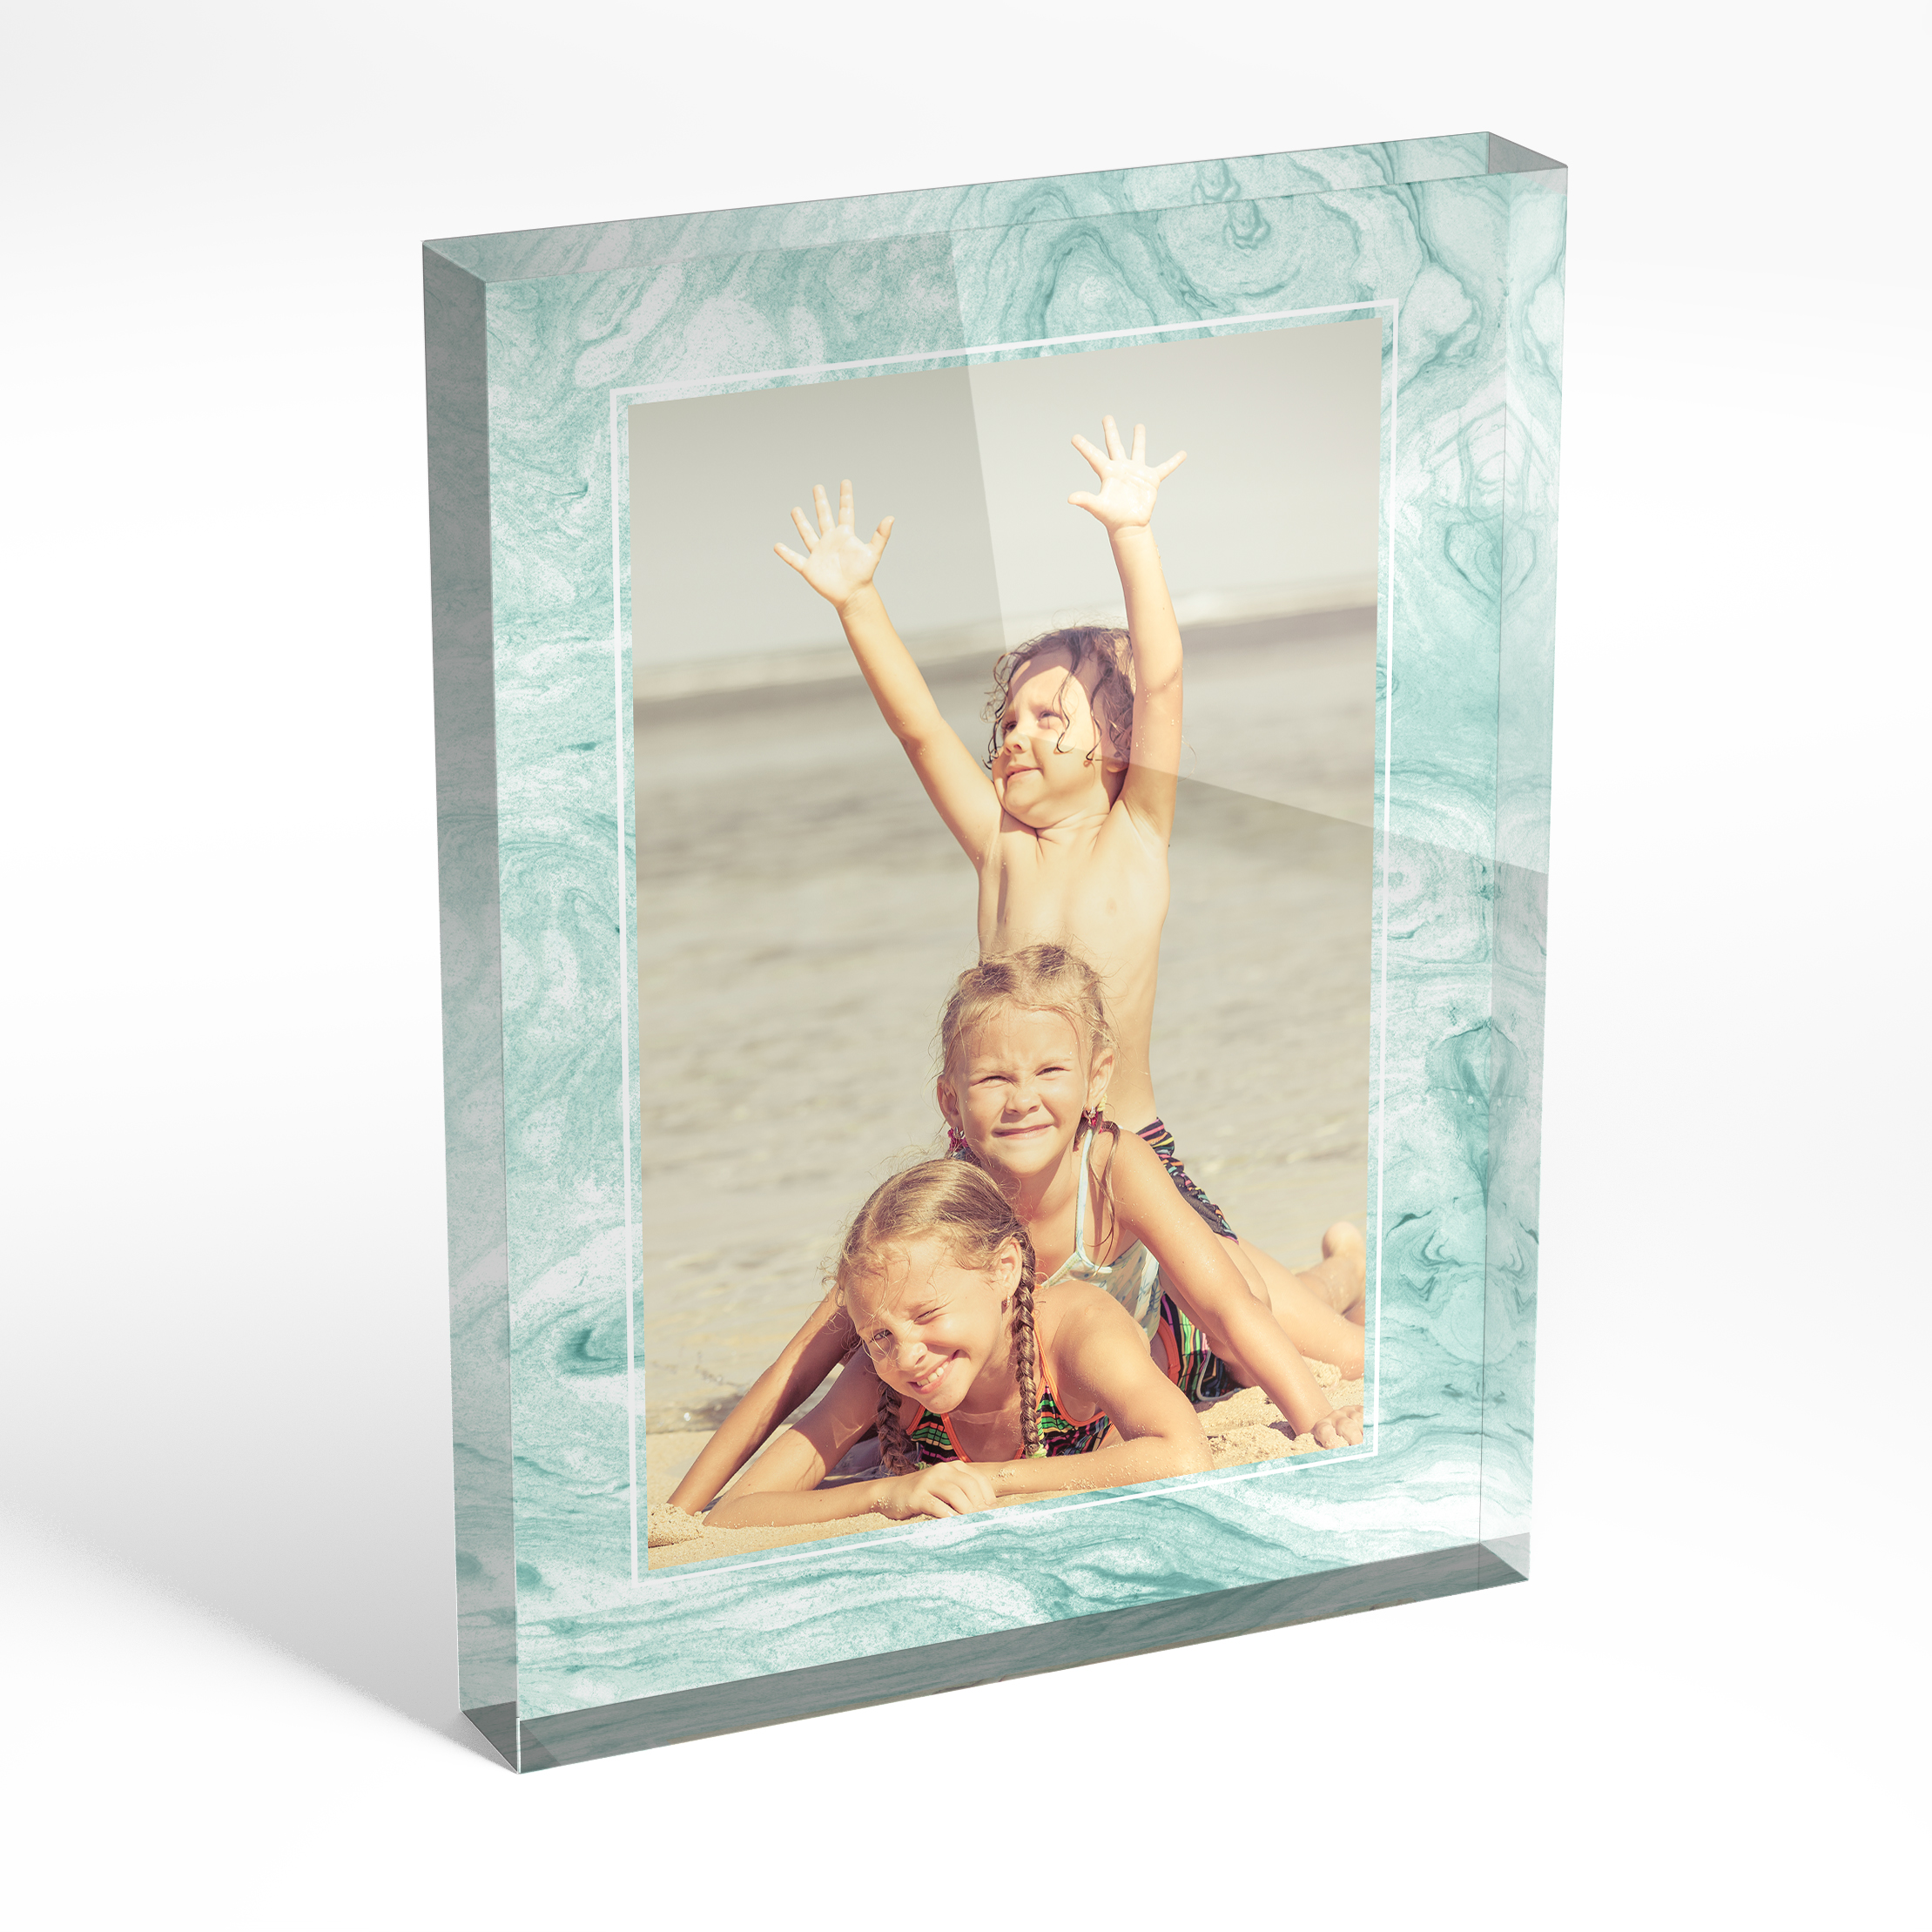 An angled side view of a portrait layout Acrylic Photo Gift with space for 1 photo. Thiis design is named "Treasured Frame". 